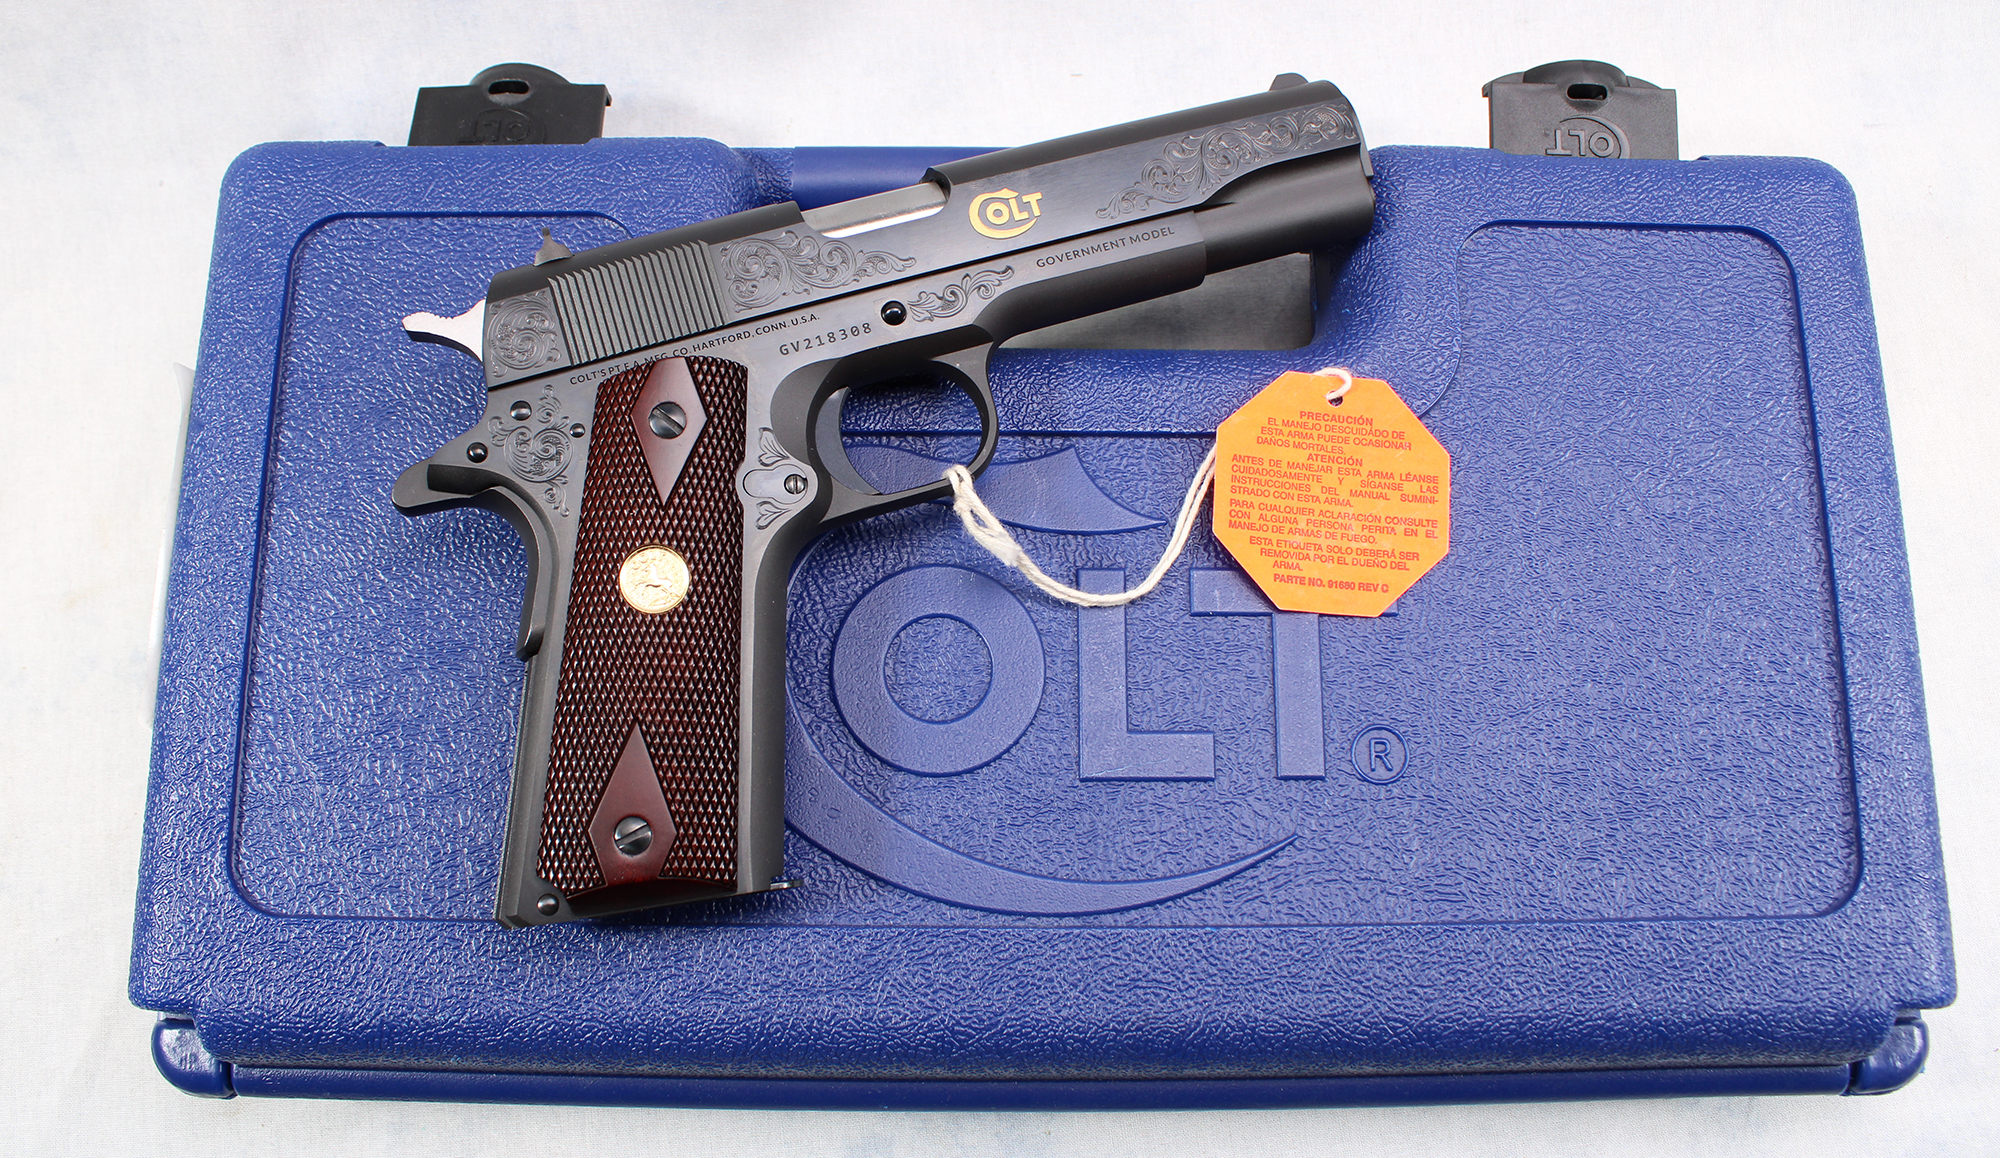 Colt 1911 Government Gold Cup 38 - Guns N Gear